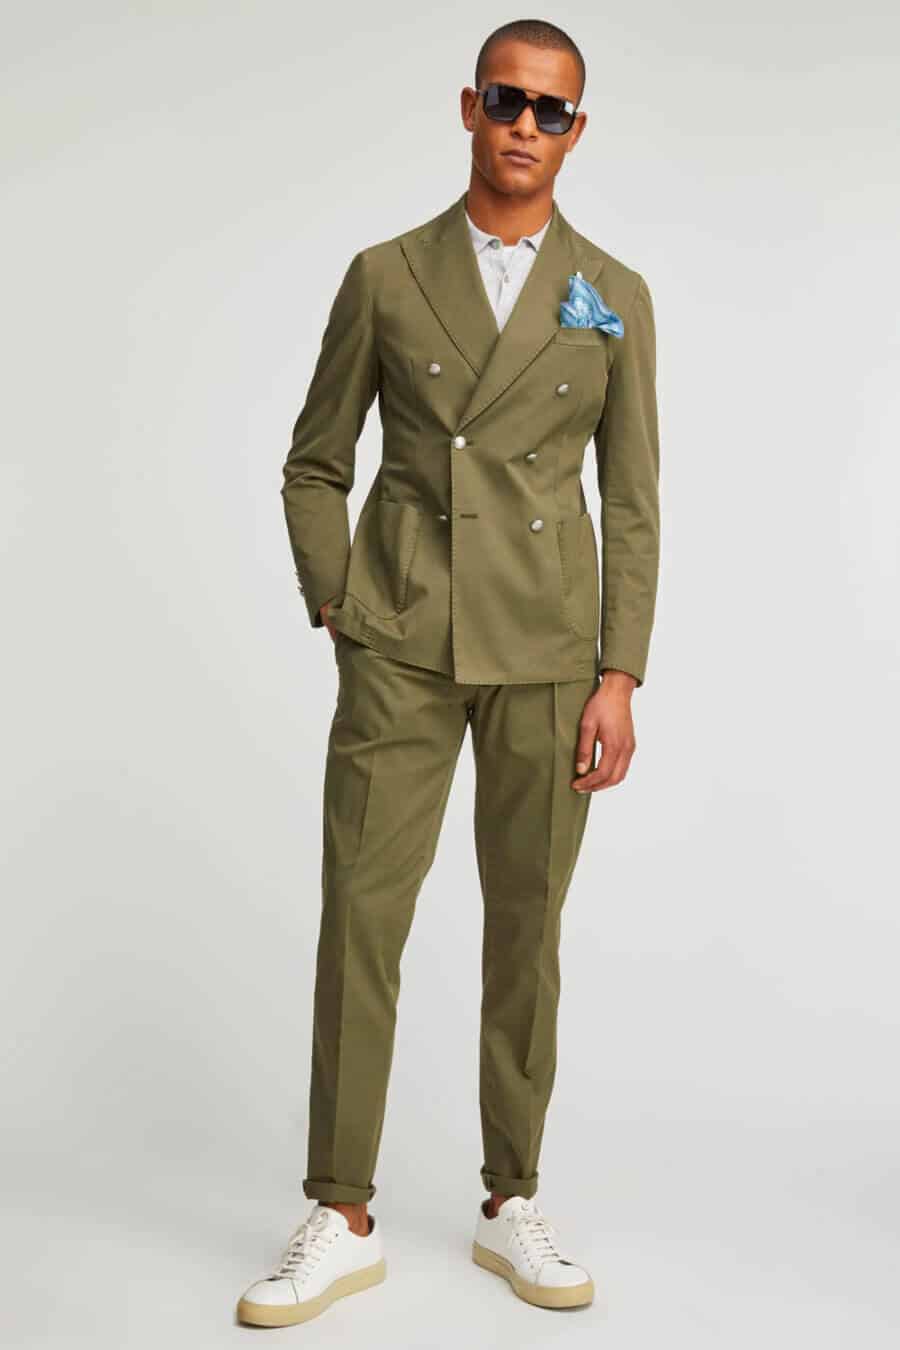 Men's green double breasted suit with white leather sneakers outfit